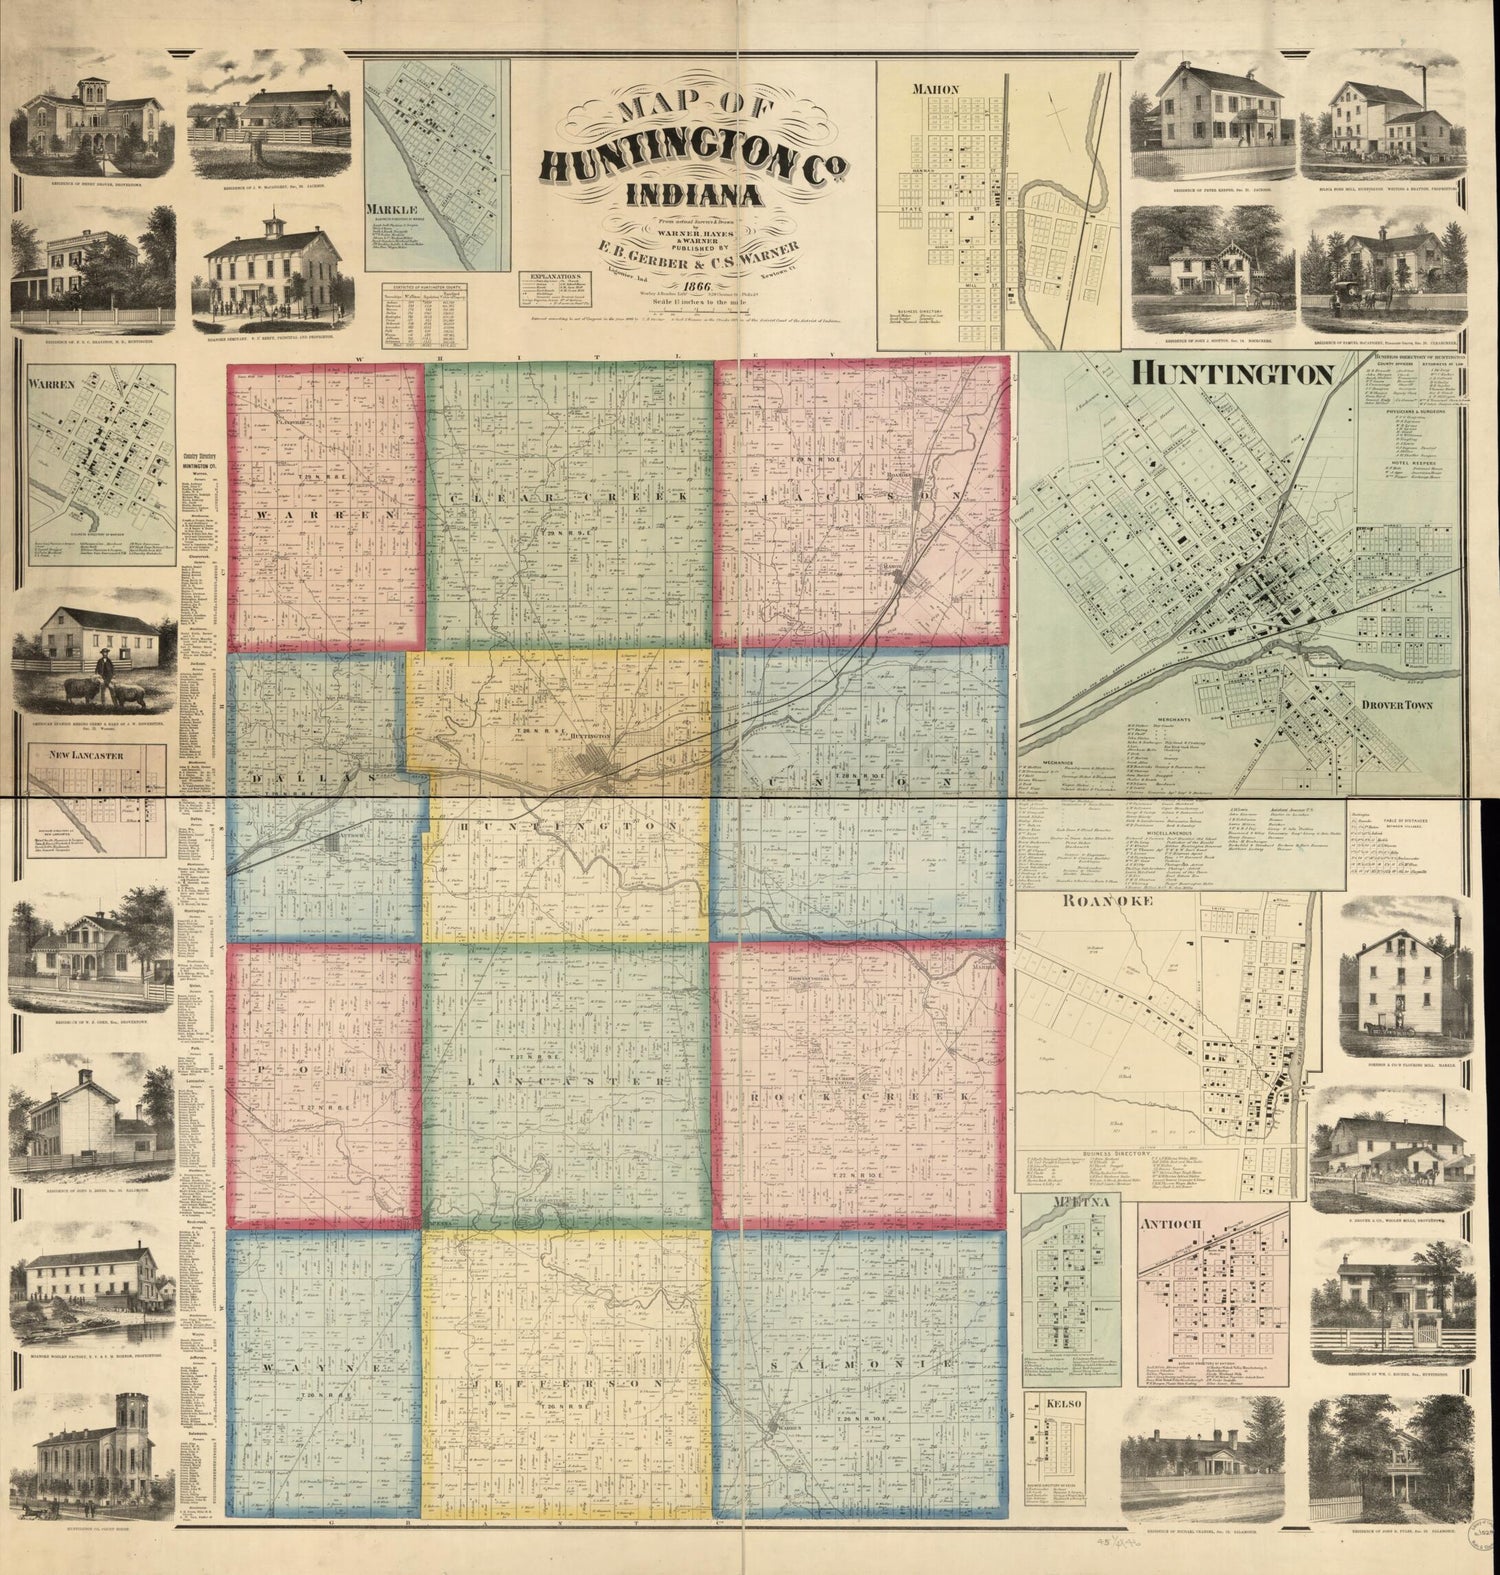 This old map of Map of Huntington Co., Indiana from 1866 was created by Hayes &amp; Warner Warner in 1866